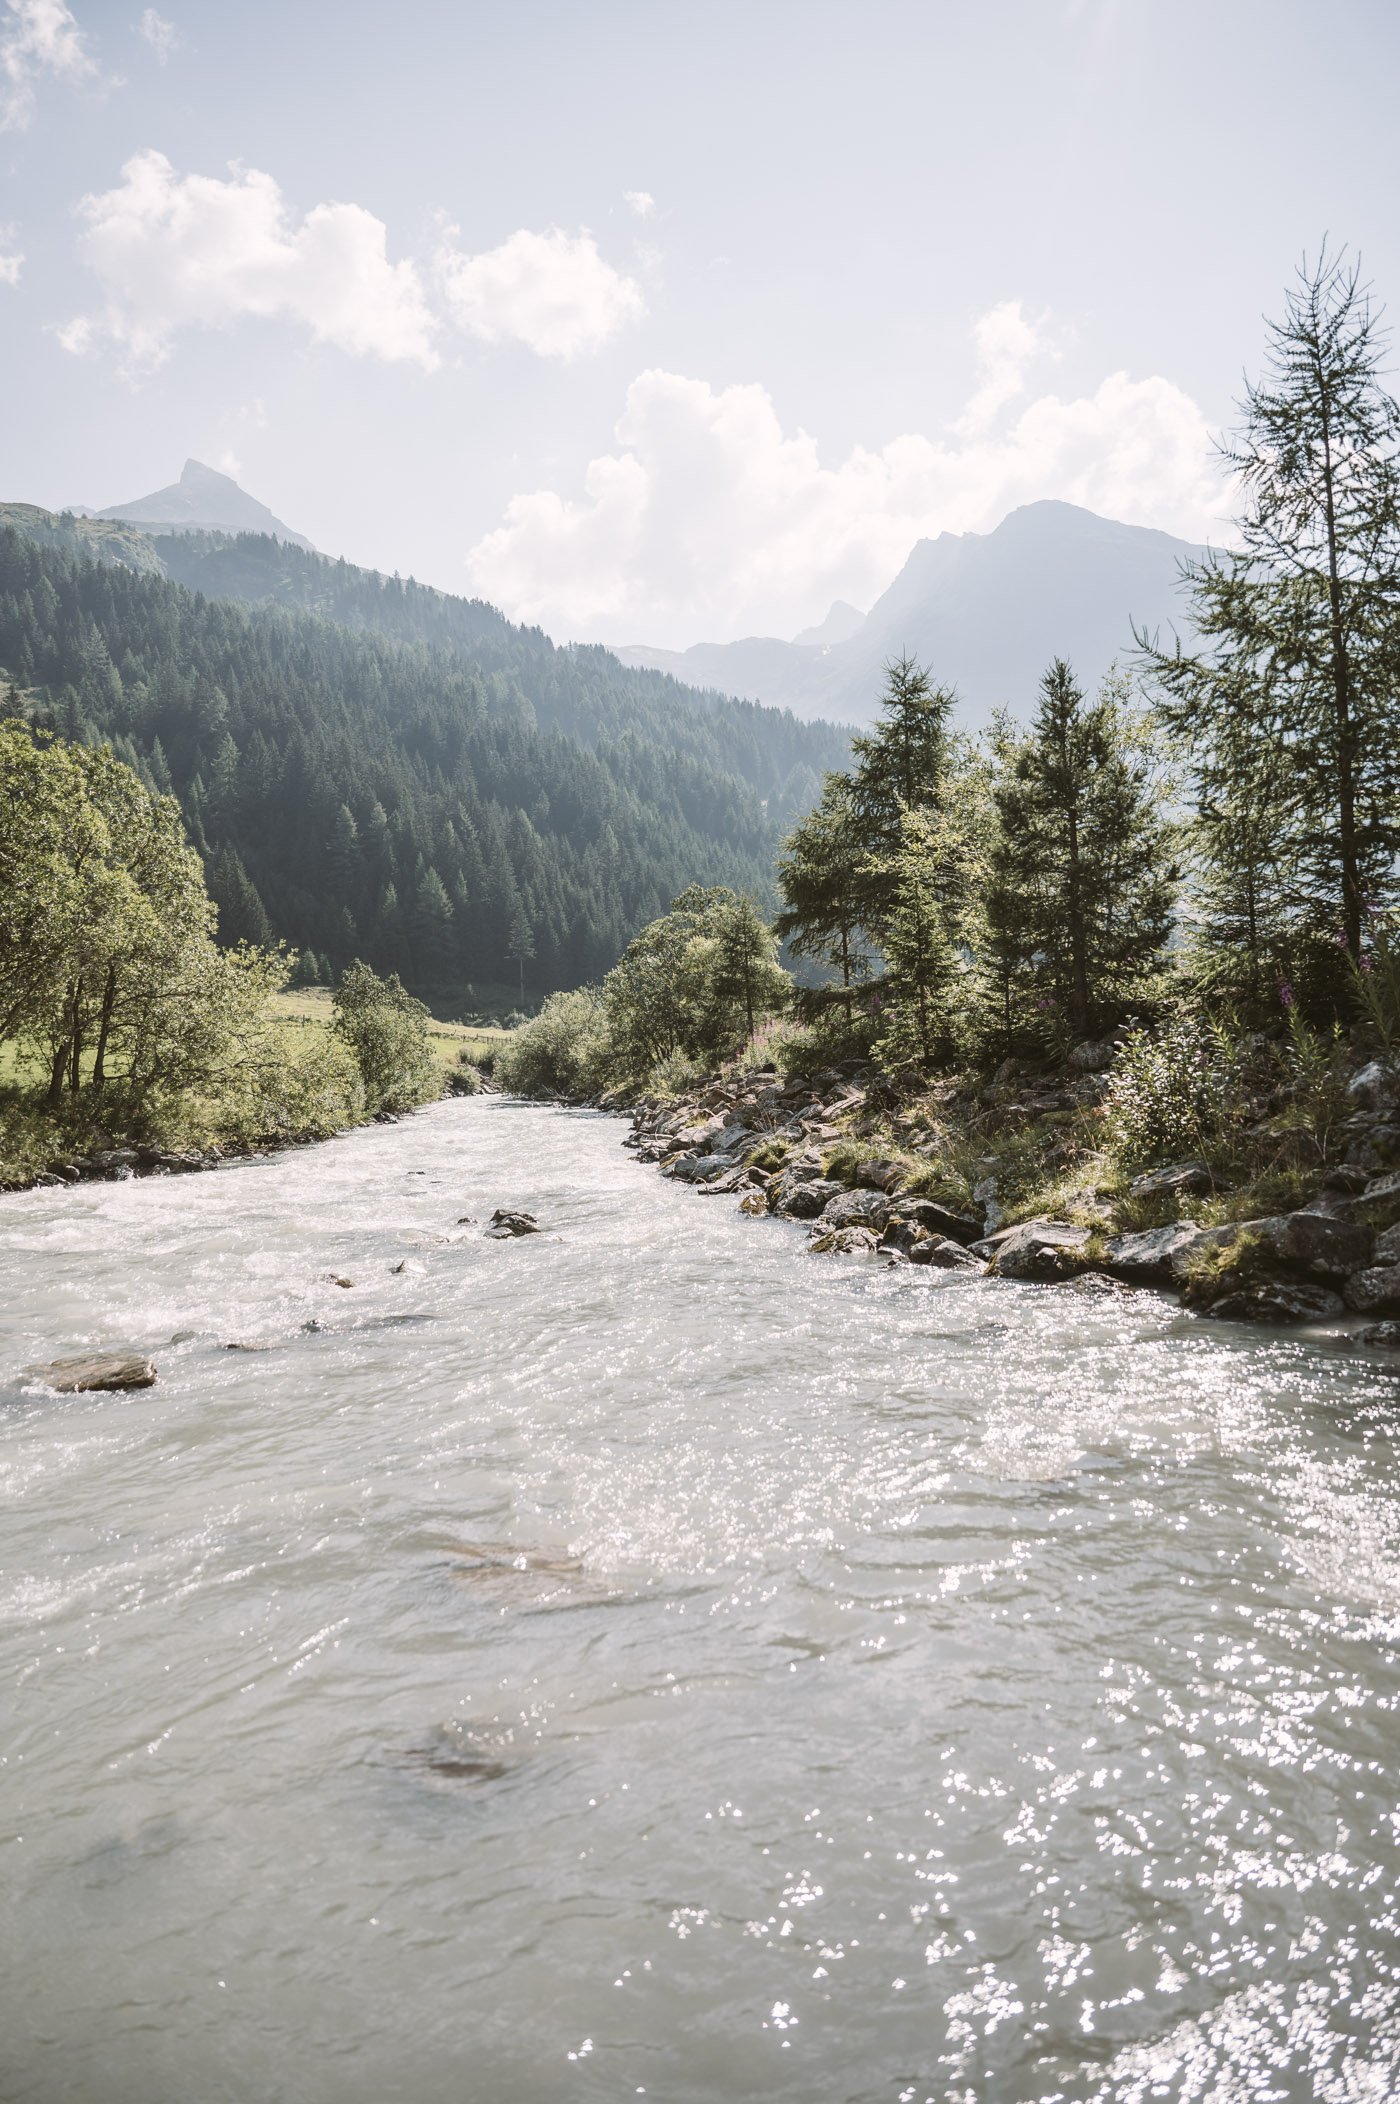 Kneippism in the glacial river in East Tyrol - part of mindful mountain experiences